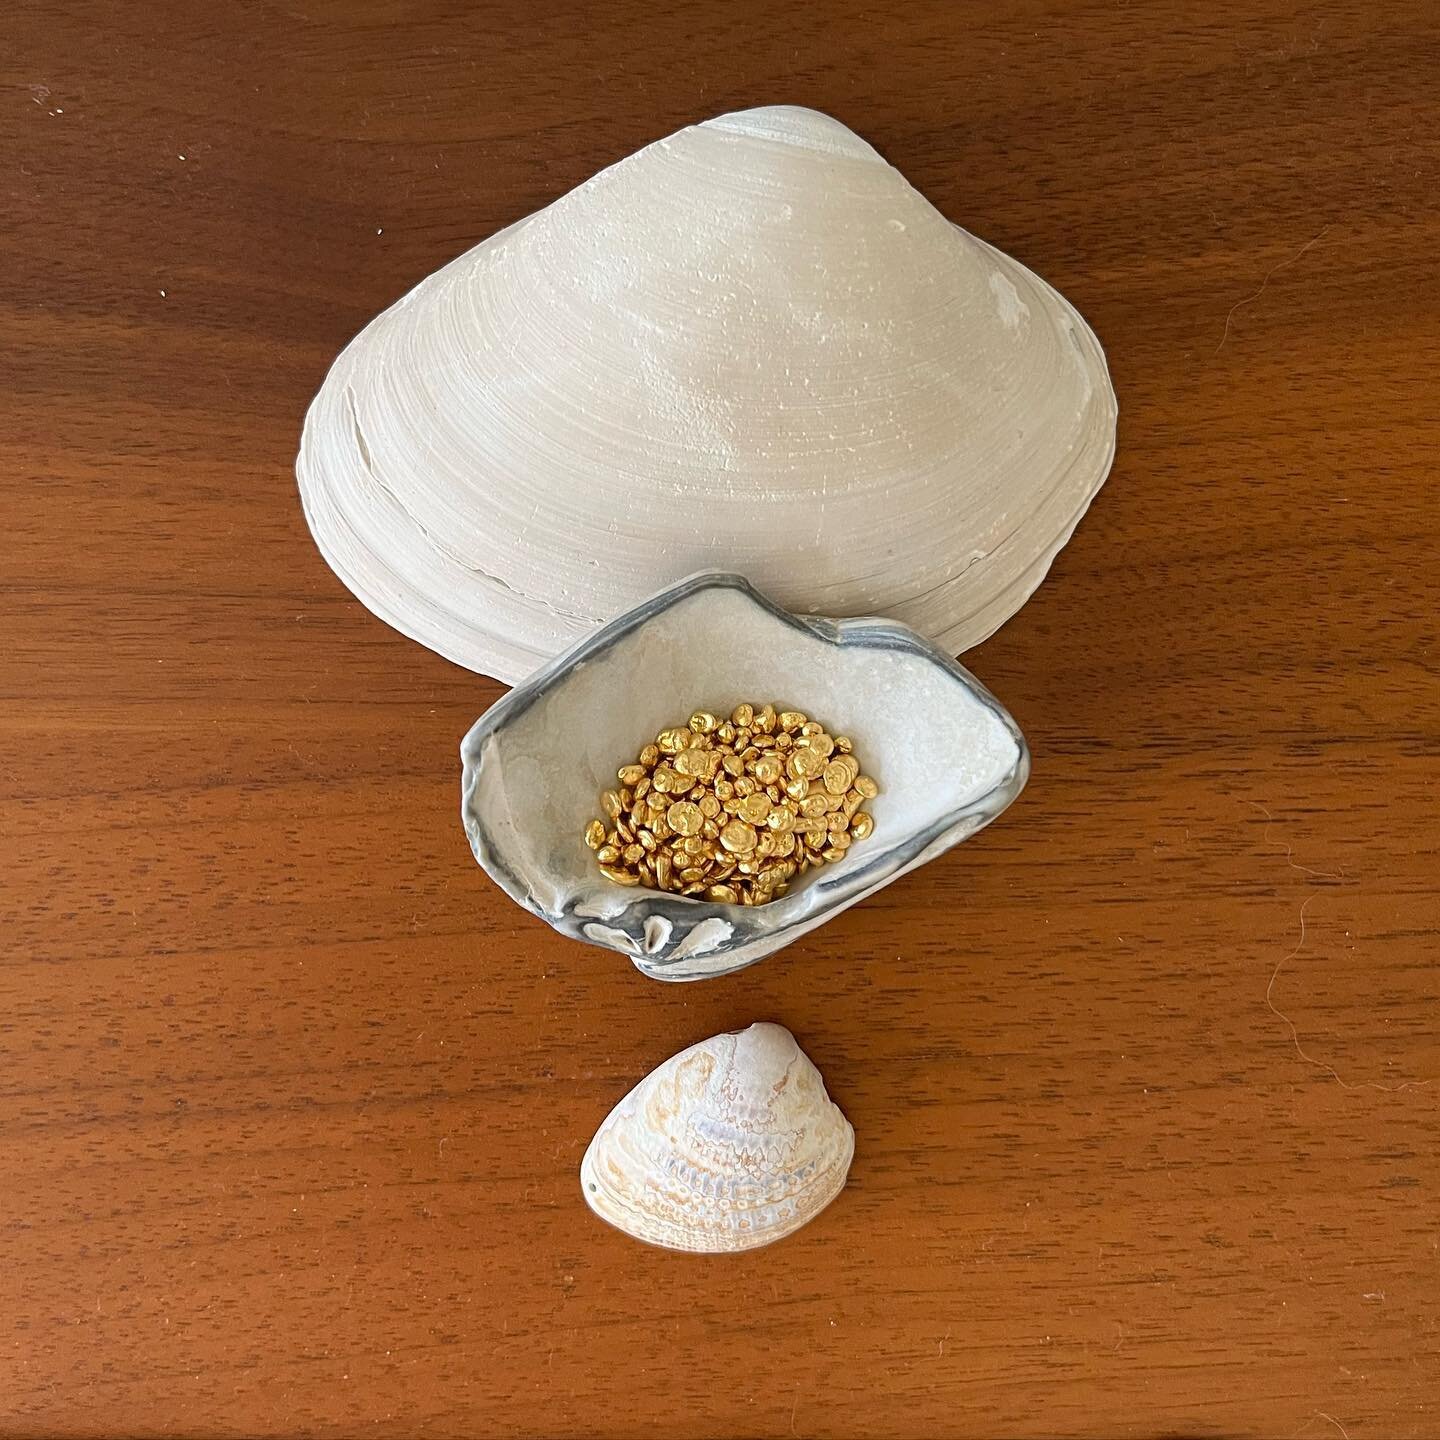 Charging the pure gold that went into the upcoming Song To The Siren collection 🐚

Shells from Topanga beach where I live now, North Carolina where I was born and big island Hawaii where the seeds for this work first took root in me. 

#sacredadornm